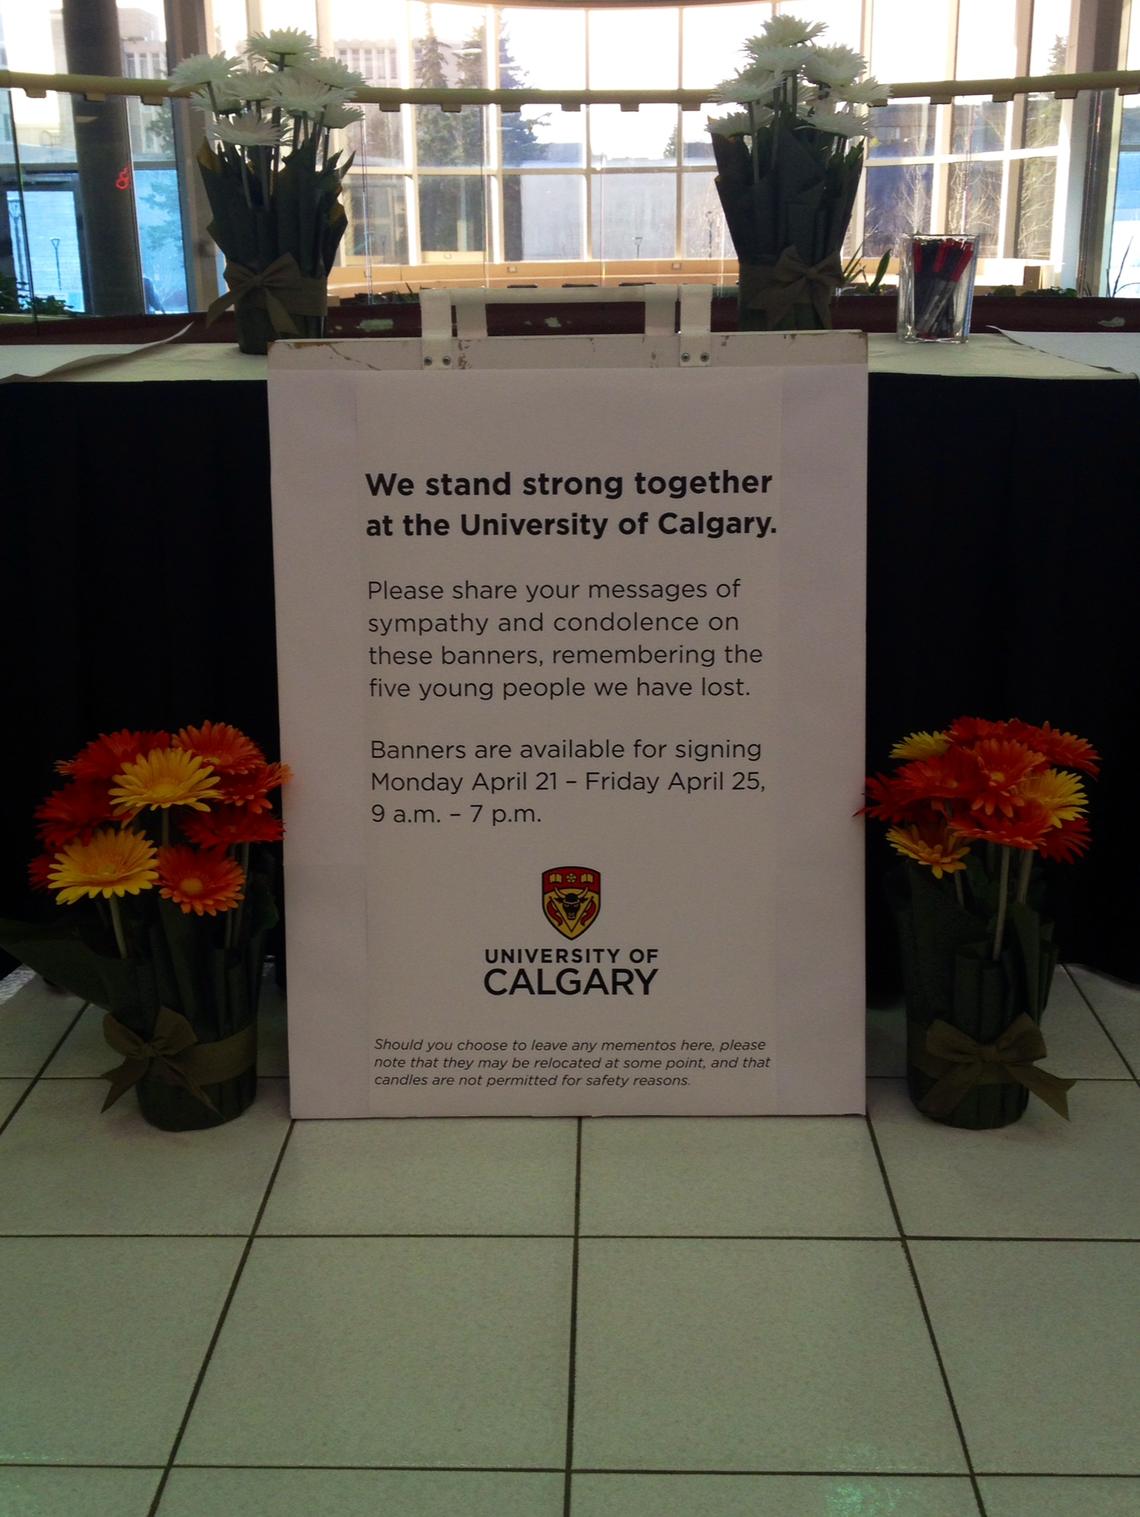 Visit the south courtyard of the MacEwan Student Centre this week to add your messages of condolence and support to a banner.